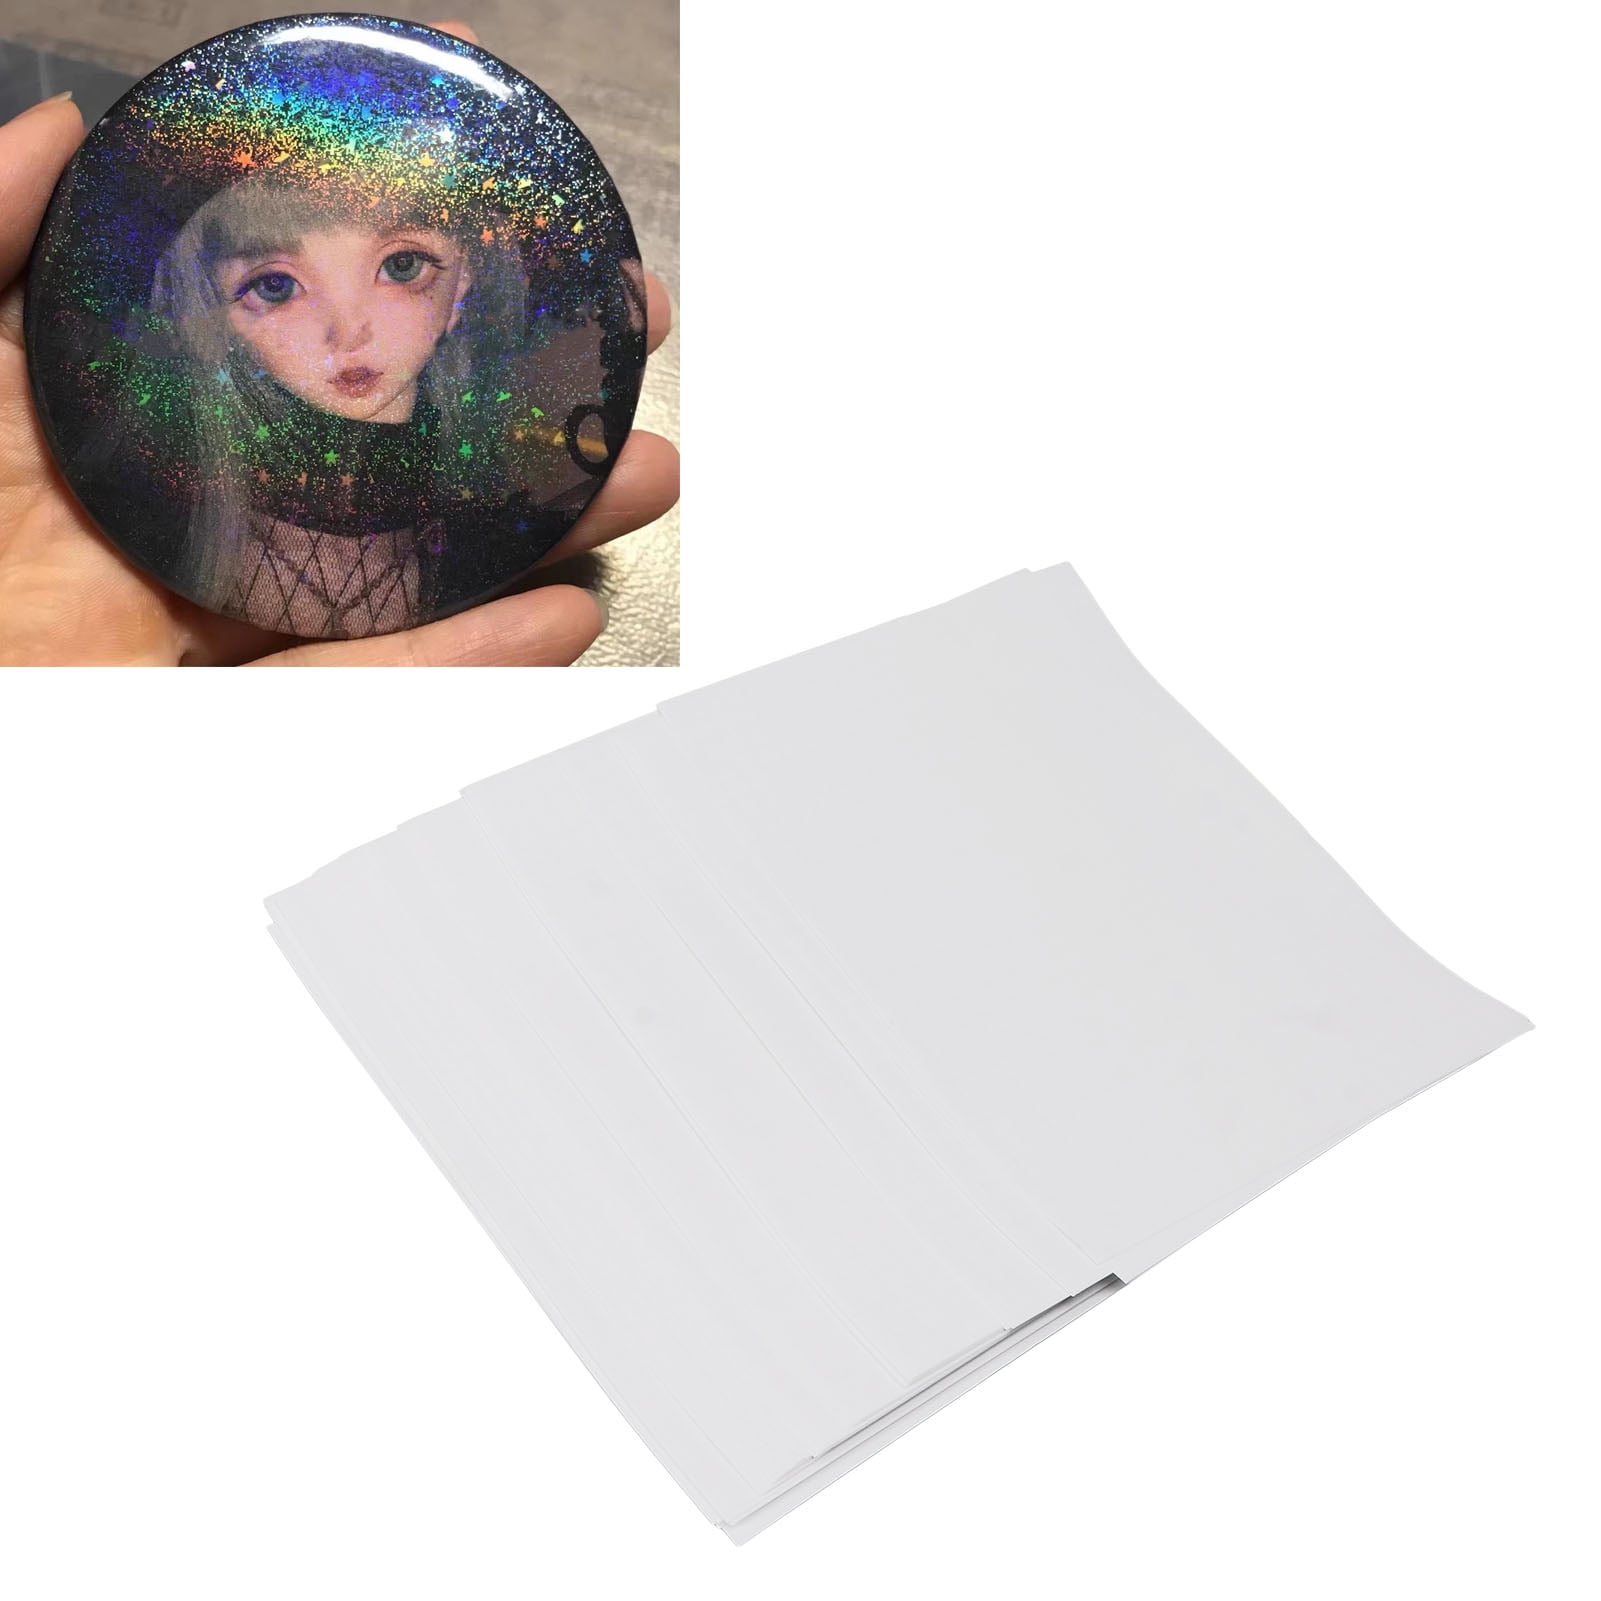 50 Pcs A4 Size Holographic Cold Laminated Overlay Film Glitter DIY Pattern